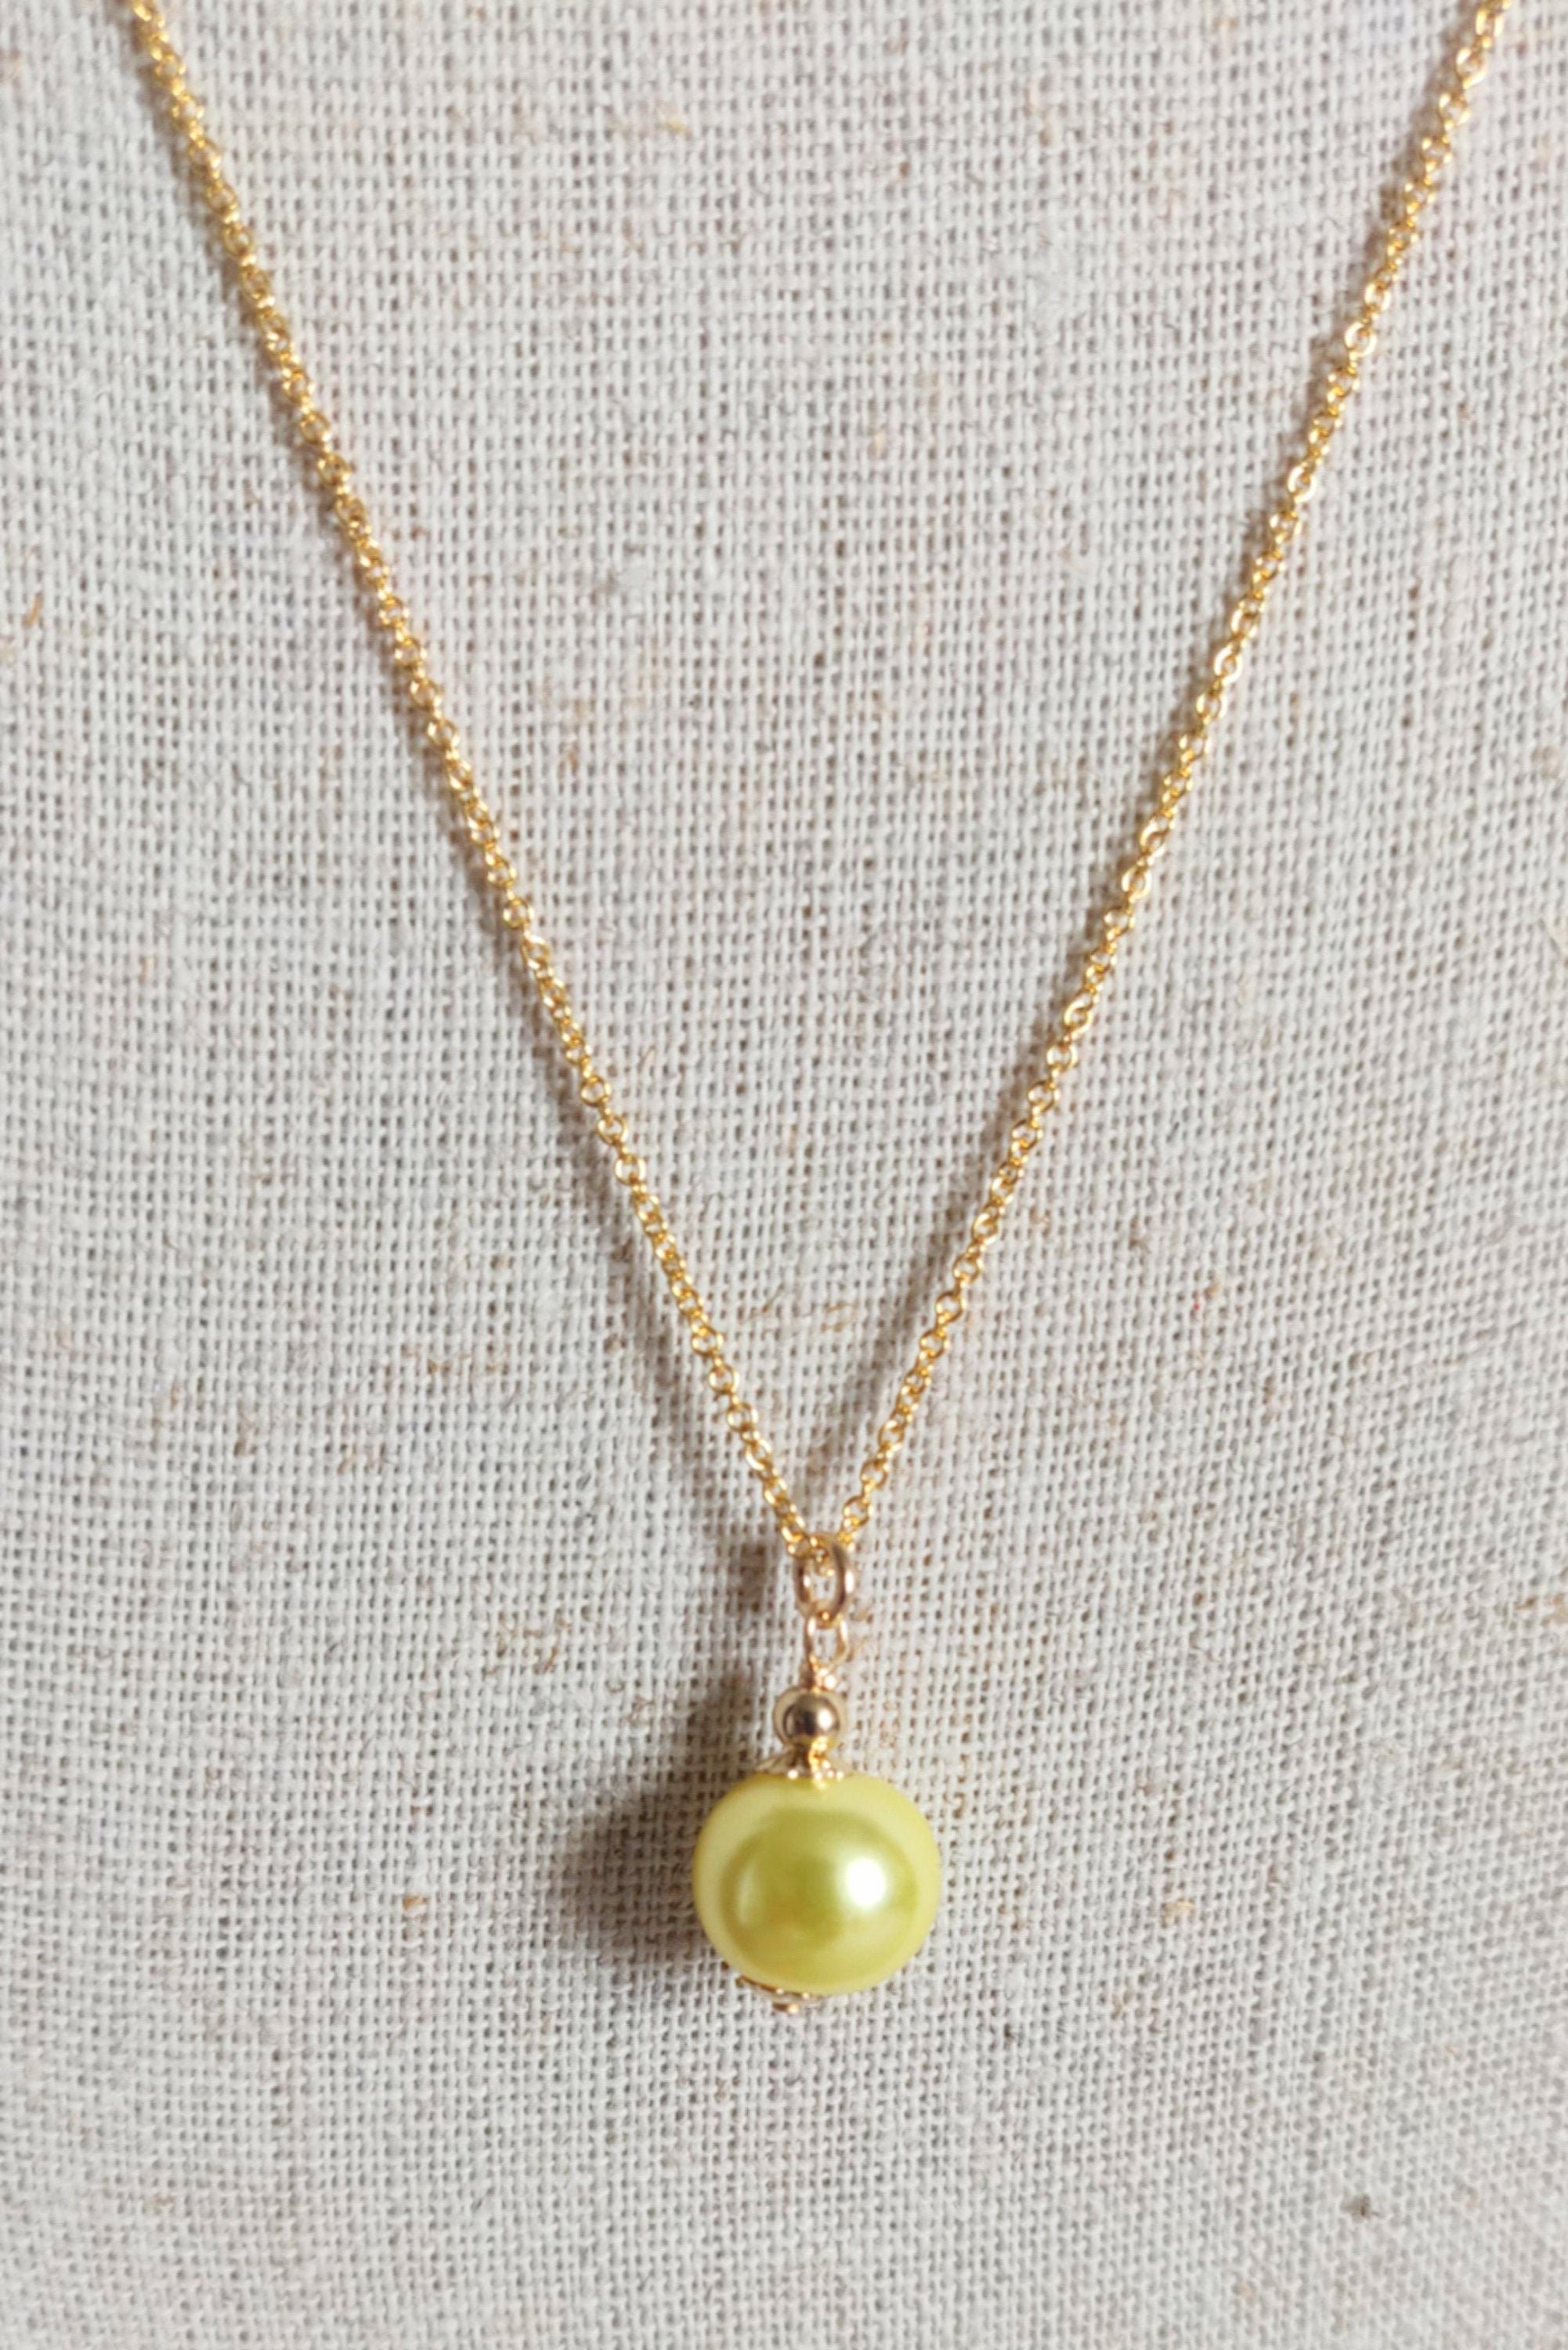 14K Gold Pearl Cage Pendant- Round Cage Pearl Necklace - Black Pearl Cage Pendant 8K Yellow Gold Cultured Pearl Pendant